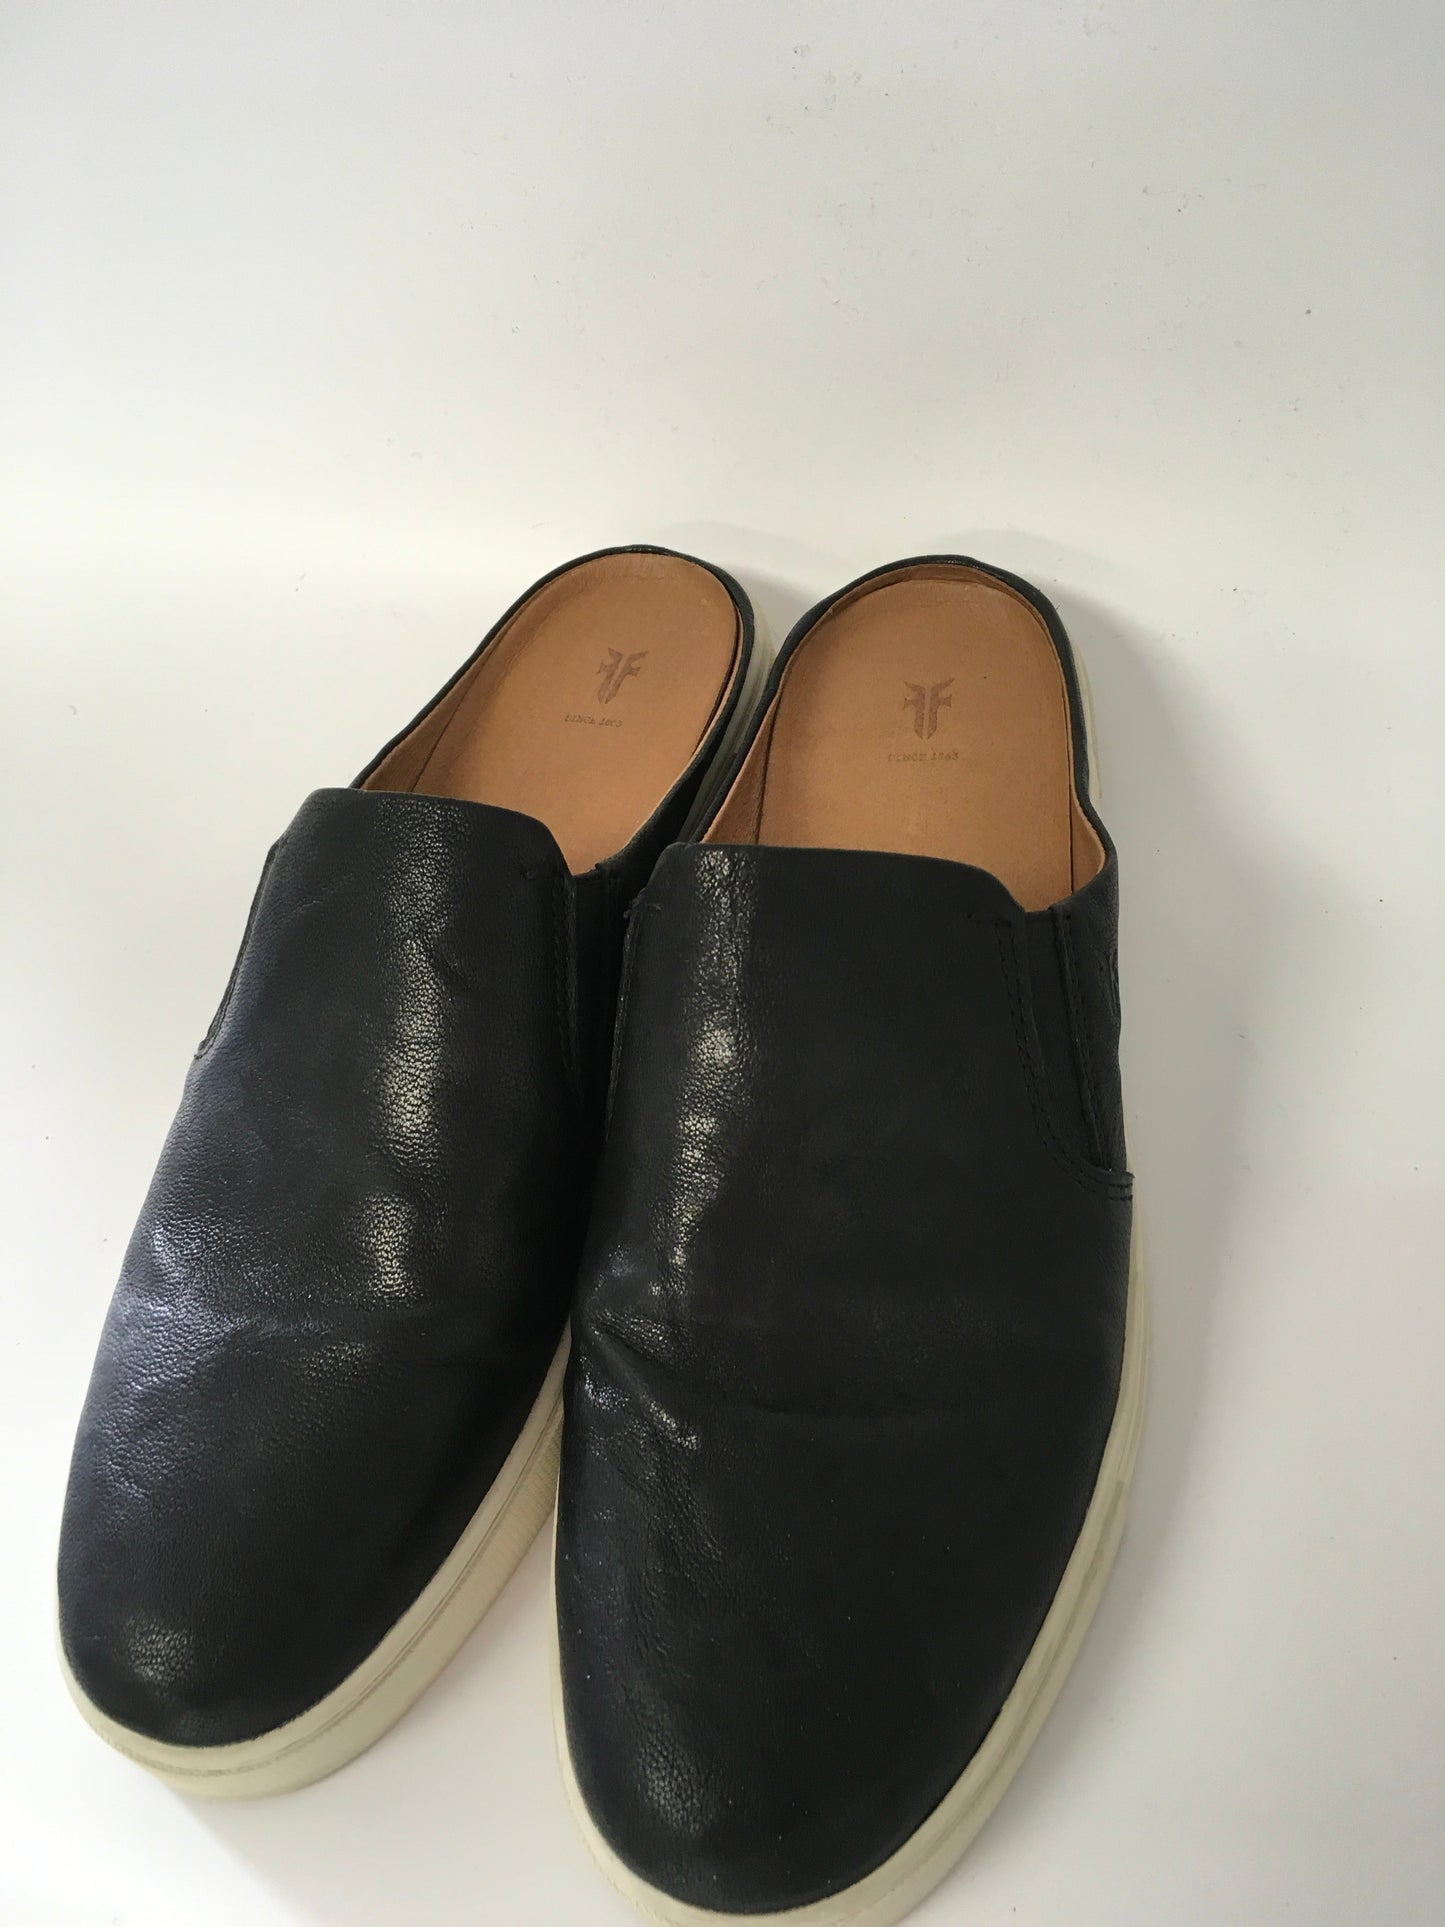 Shoes Flats Other By Frye  Size: 9.5